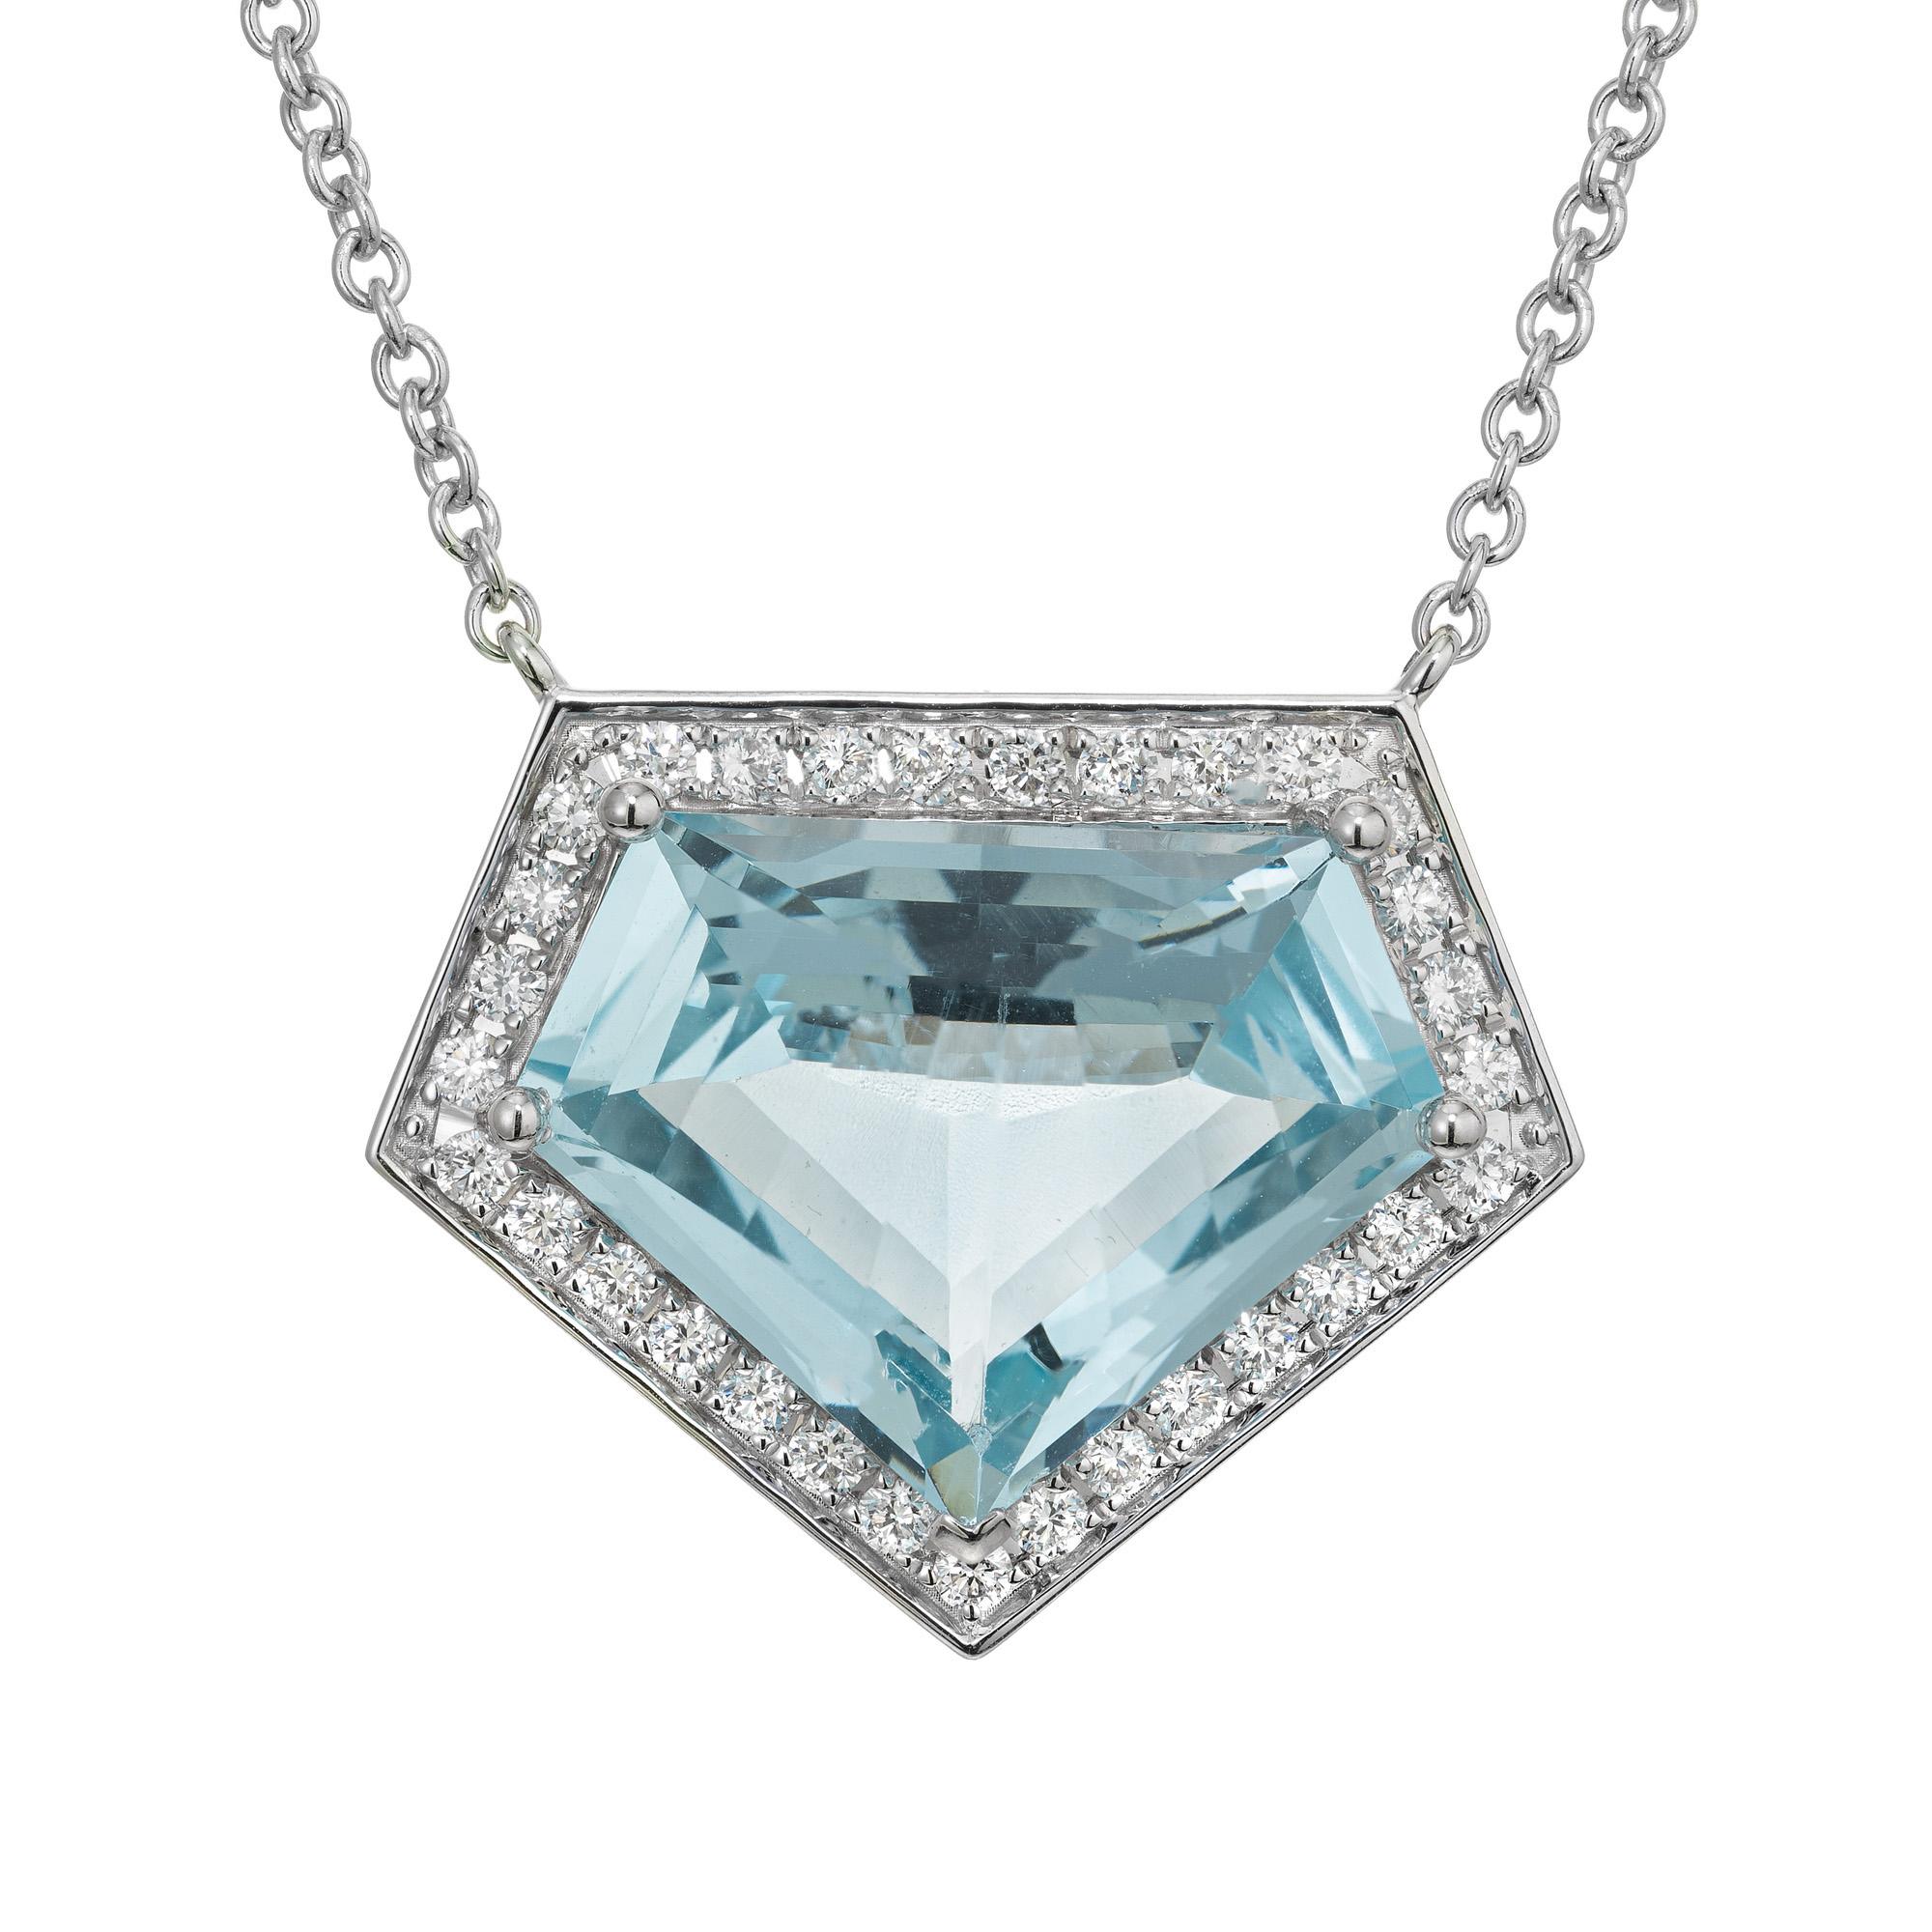 Unique, one of a kind, custom cut diamond shape aquamarine and diamond pendant necklace. This stunning piece begins with a 10.04ct aquamarine that is accented by a halo of 31 round brilliant cut diamonds. The icy blue hue of the aquamarine